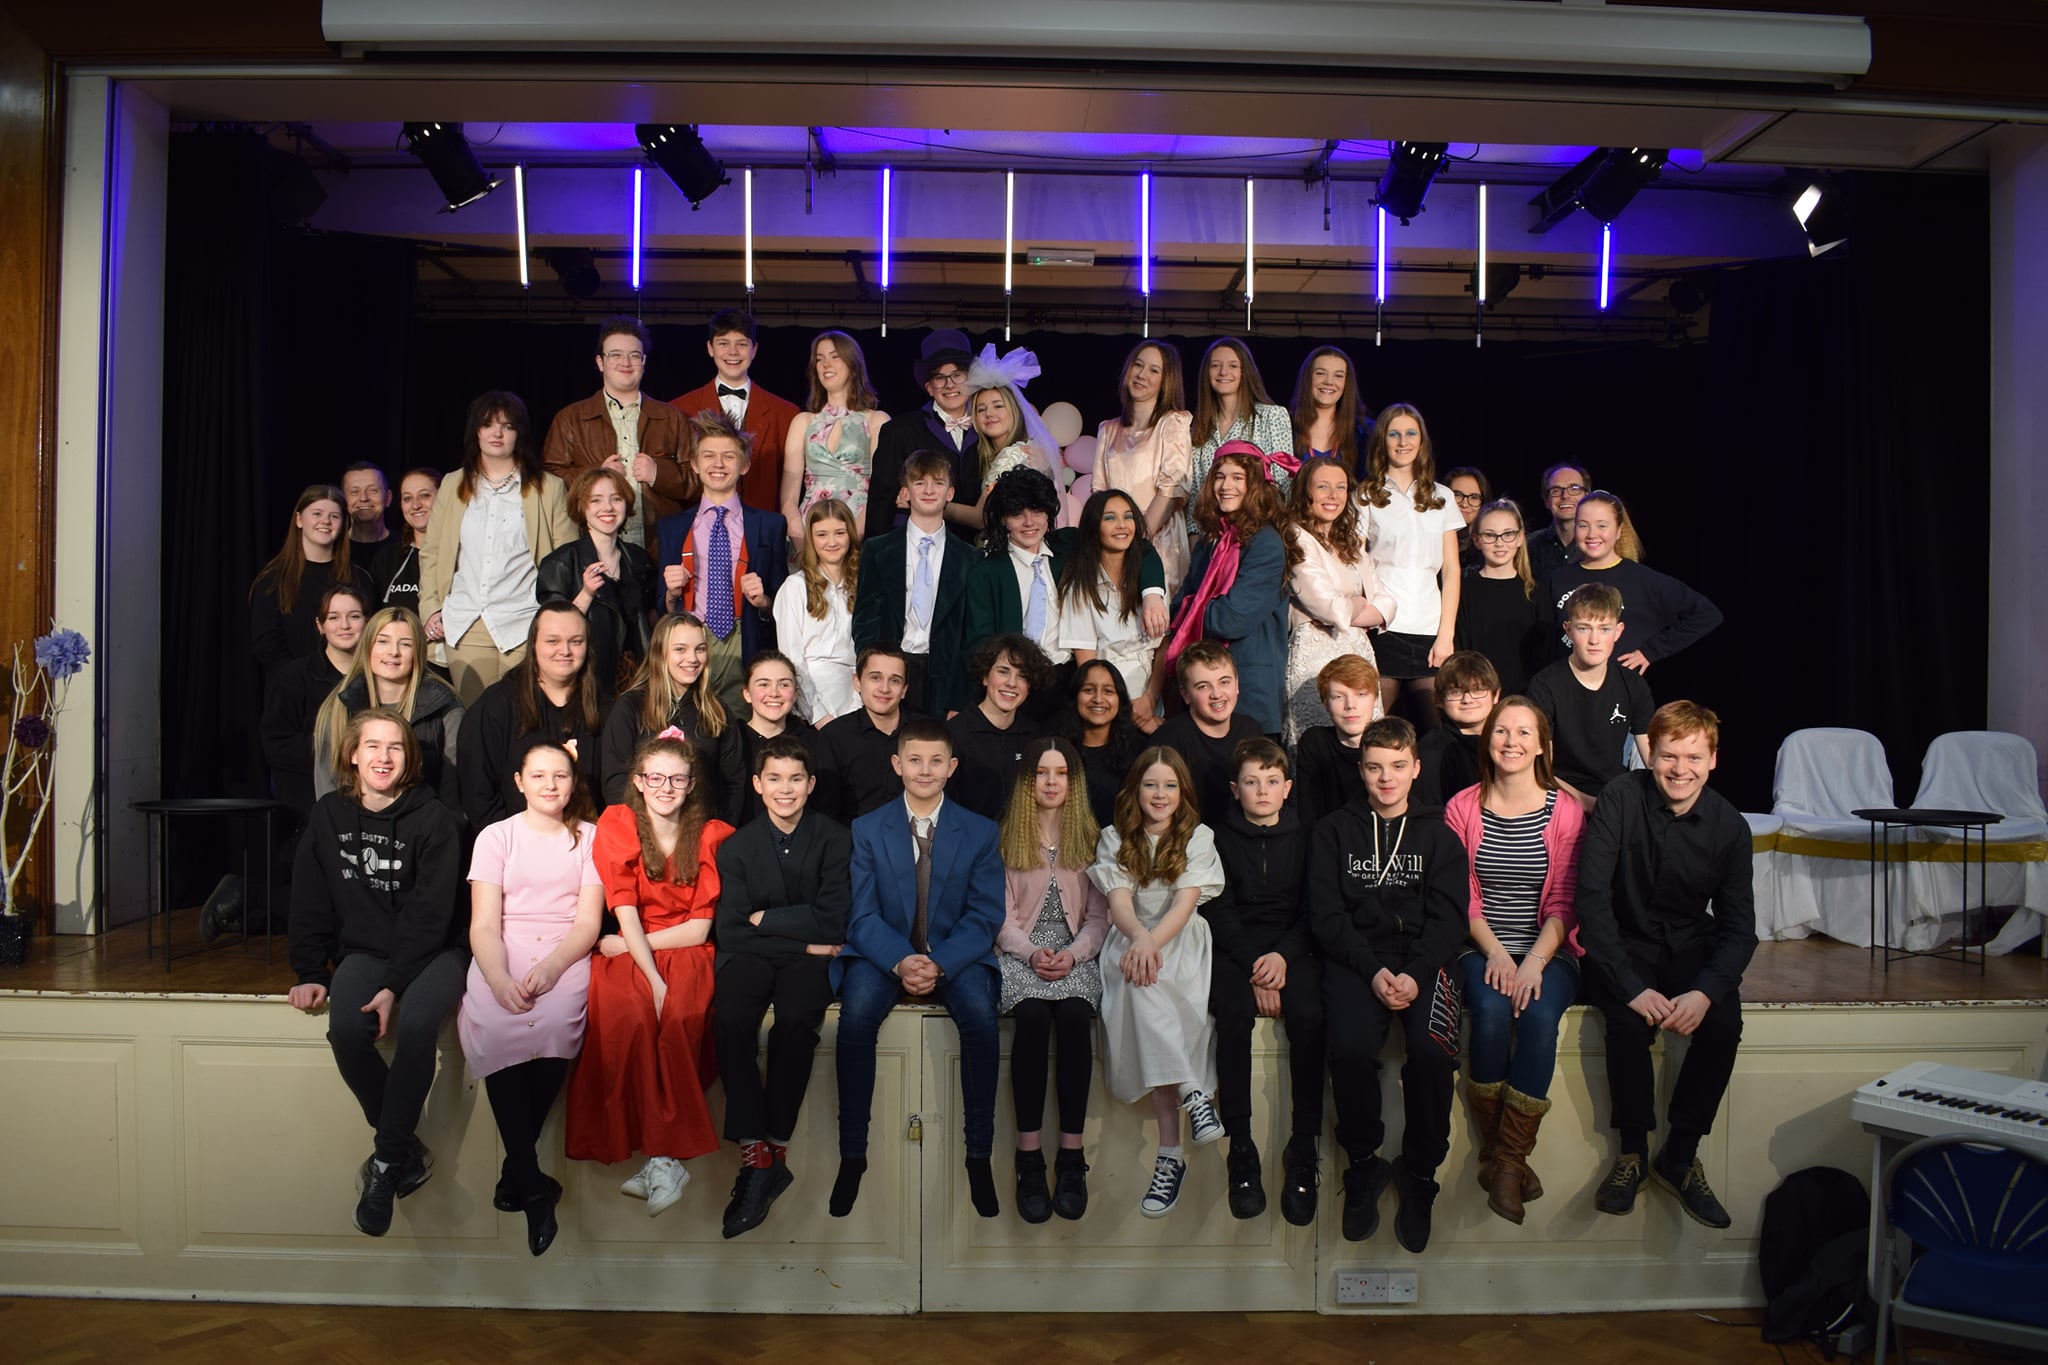 NEWS | The Bishop of Hereford’s Bluecoat School production of ‘The Wedding Singer’ a huge success